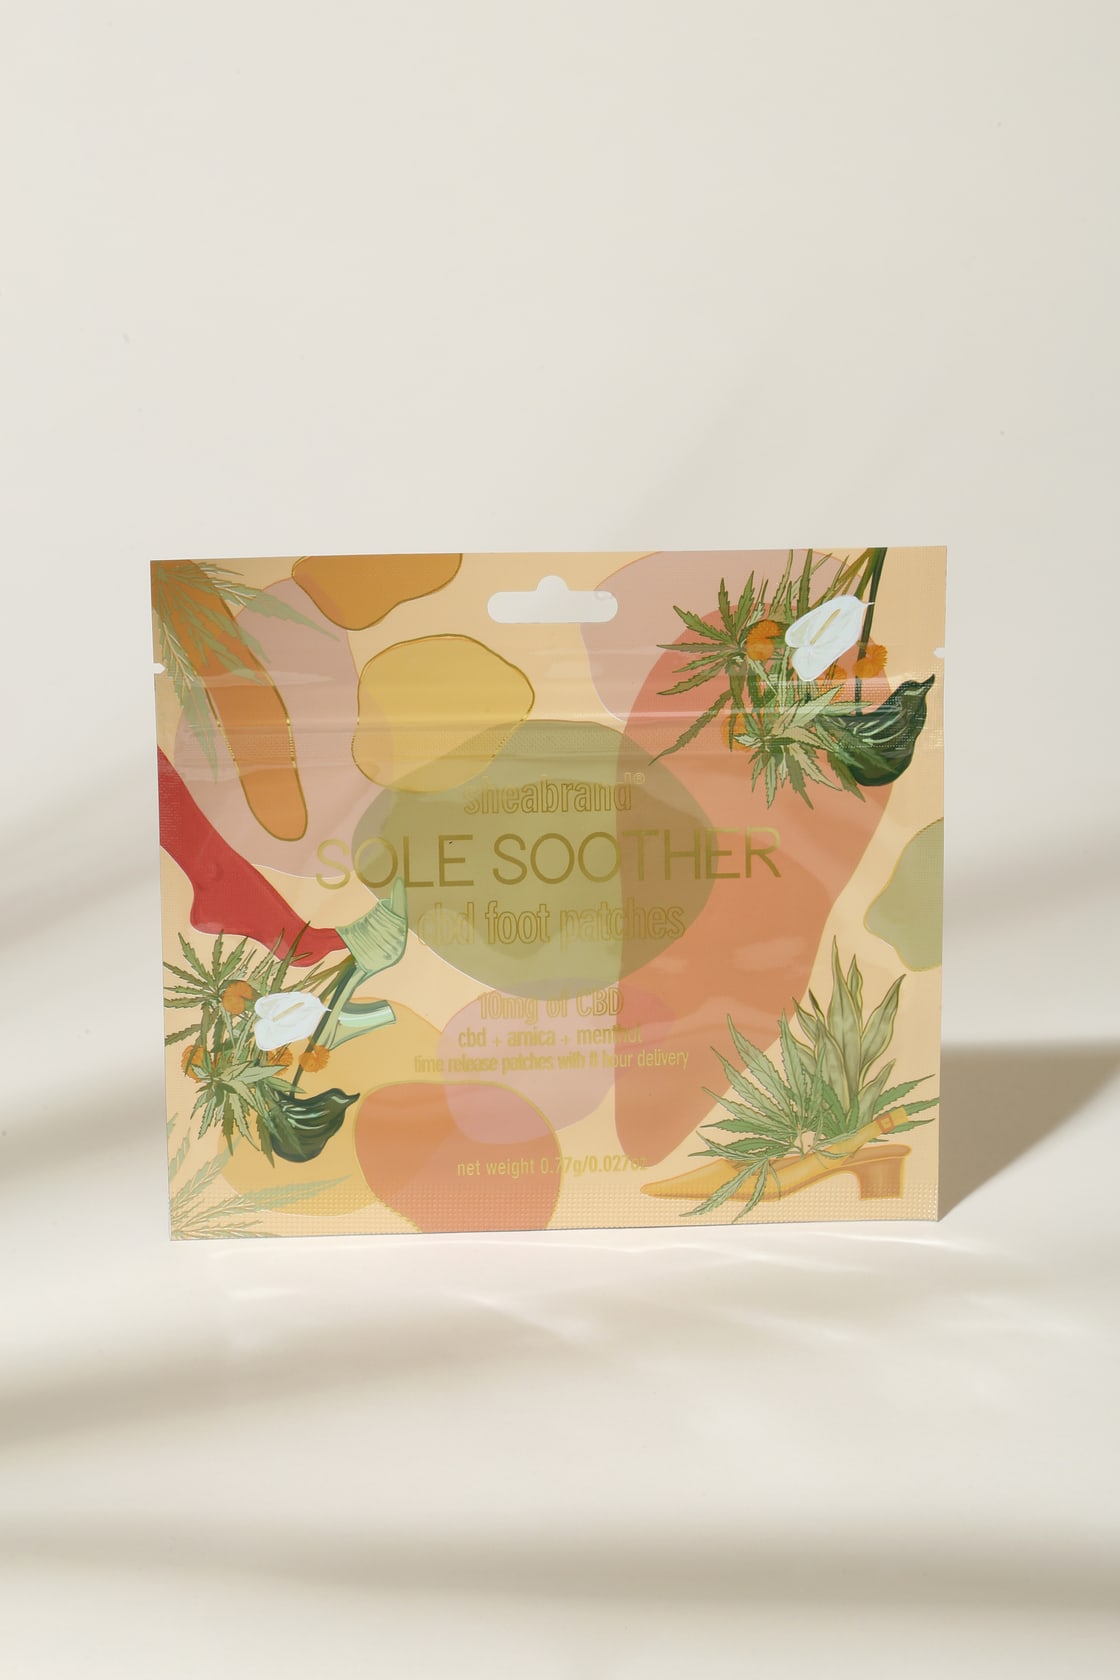 Sole Soother CBD Foot Patches